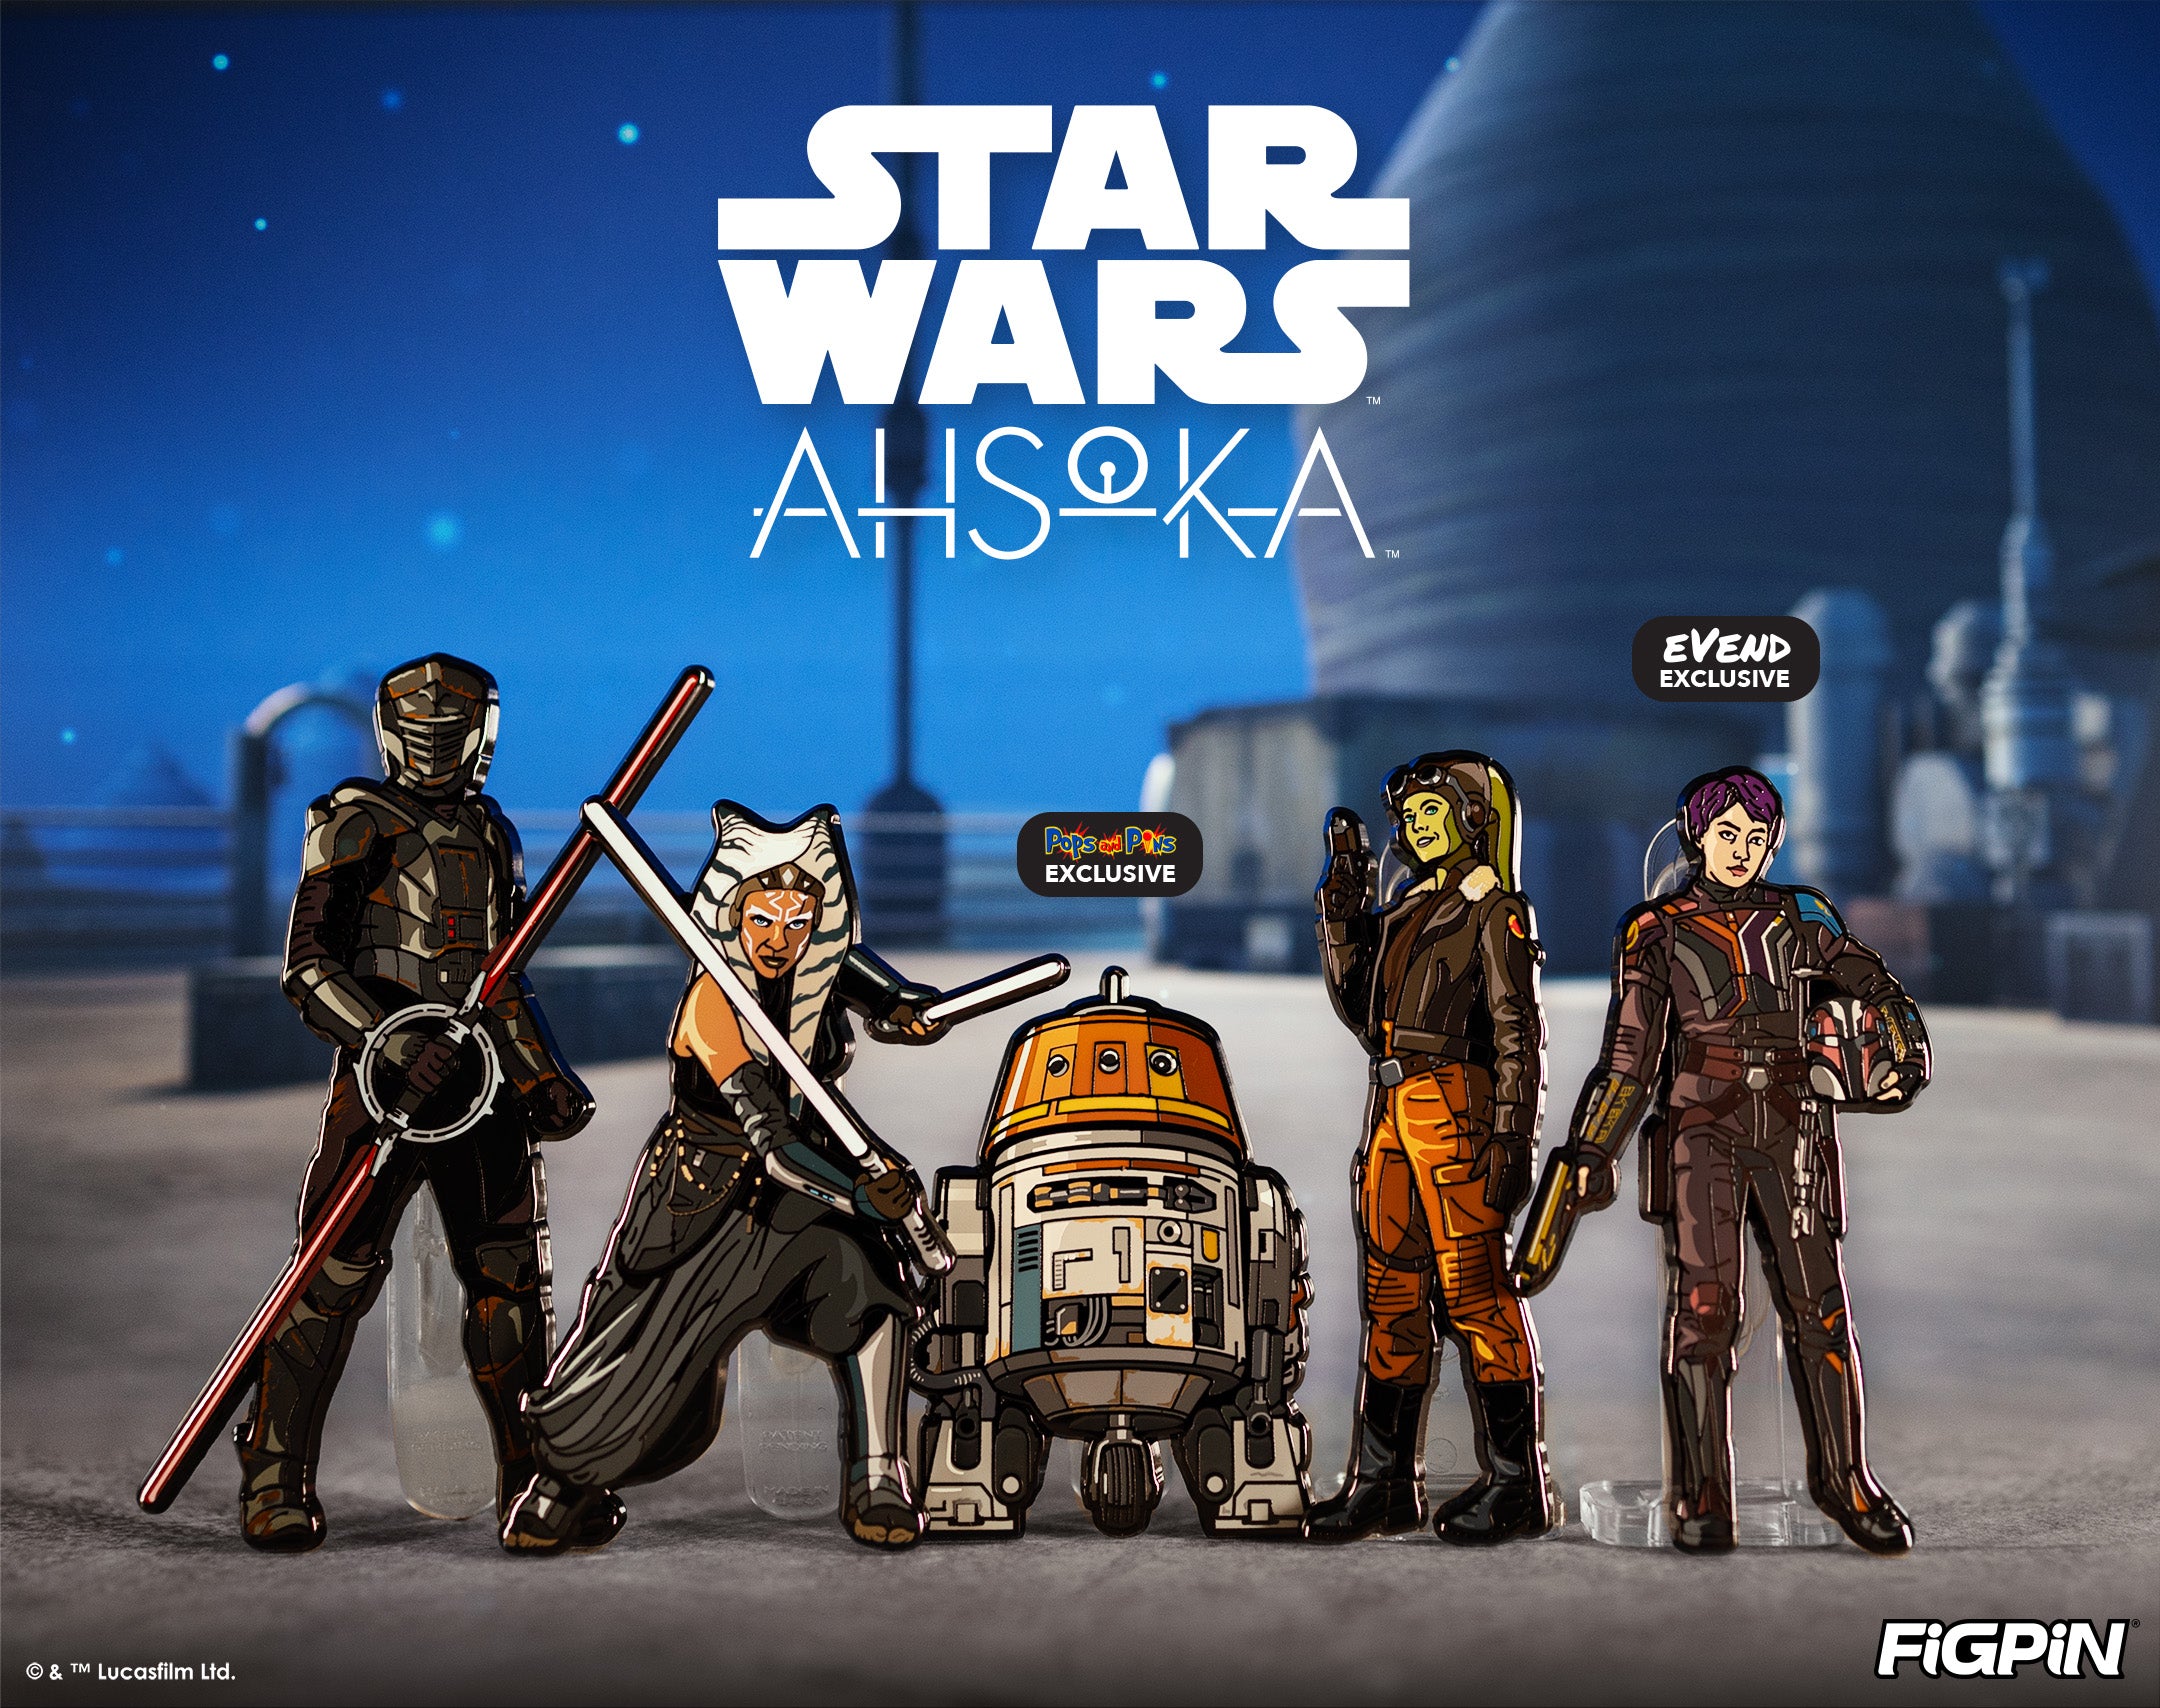 Photograph of STAR WARS AHSOKA characters available as enamel pins in this STAR WARS AHSOKA FiGPiN wave release